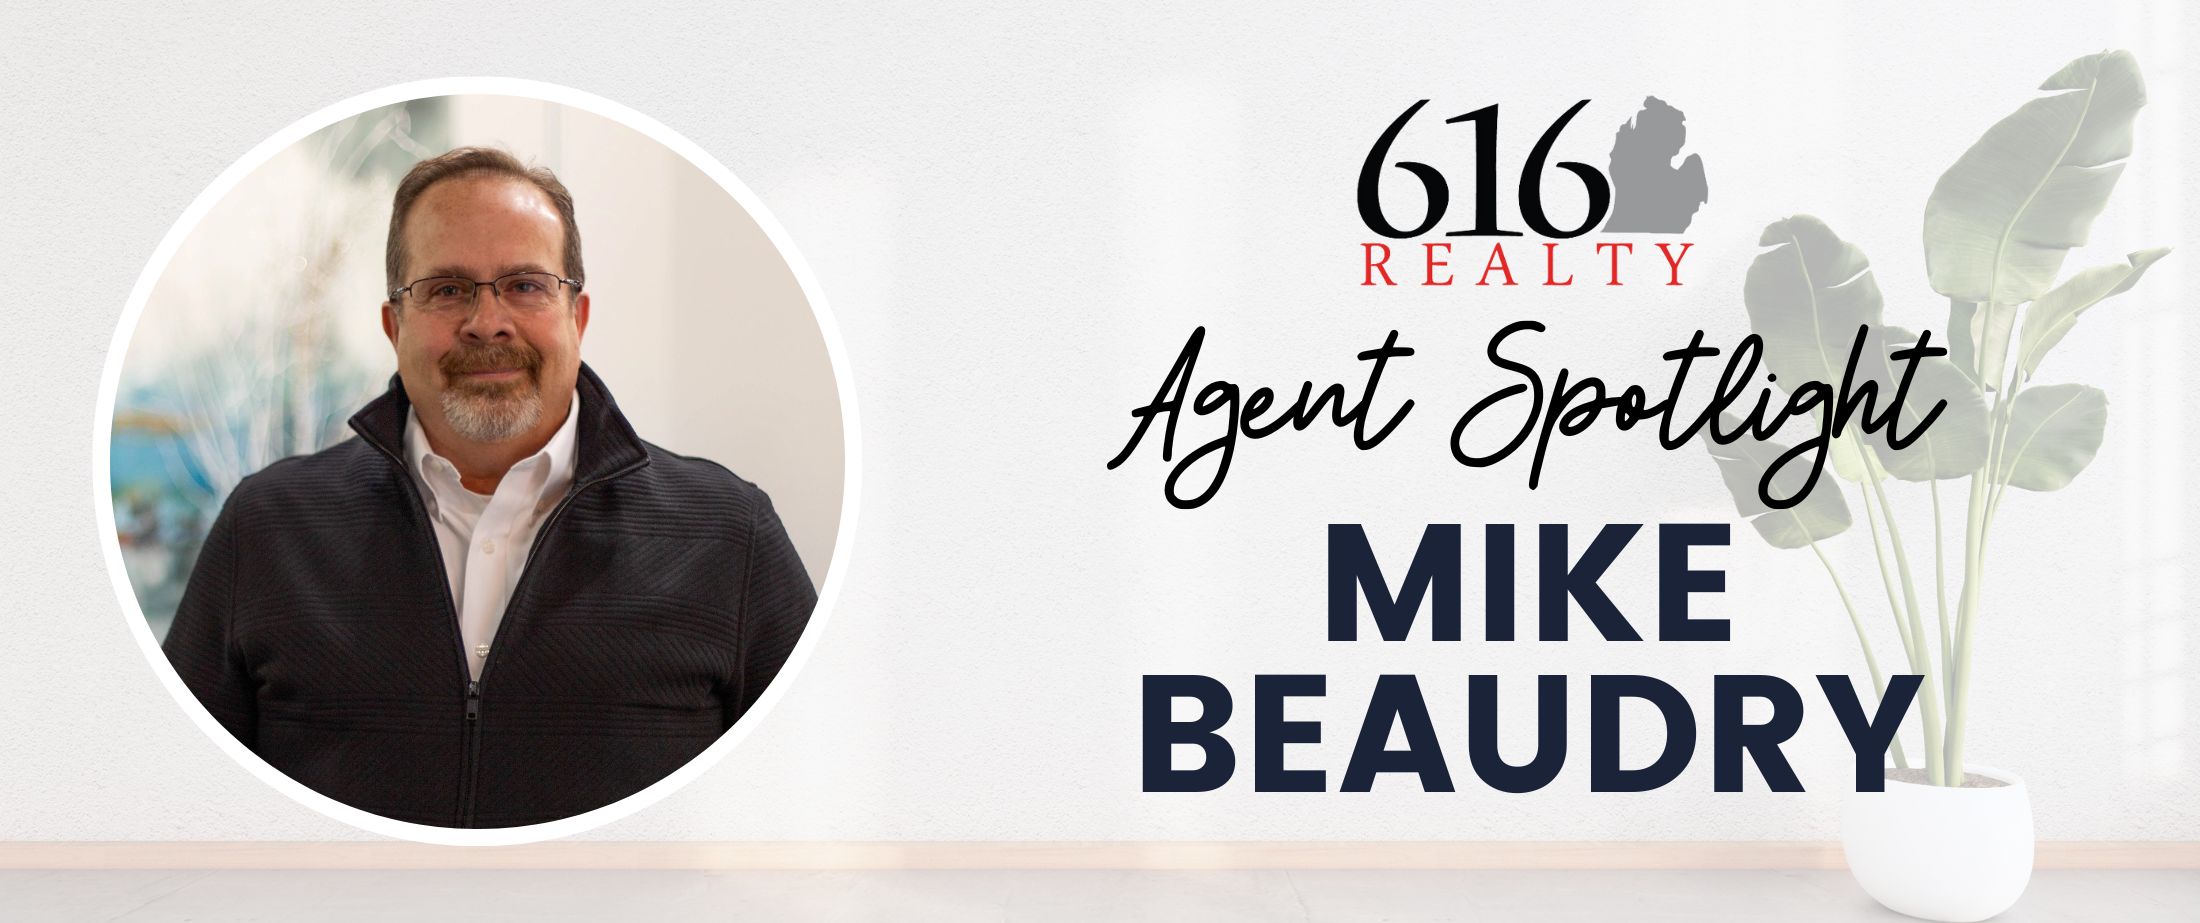 Mike Beaudry -- Featured Agent